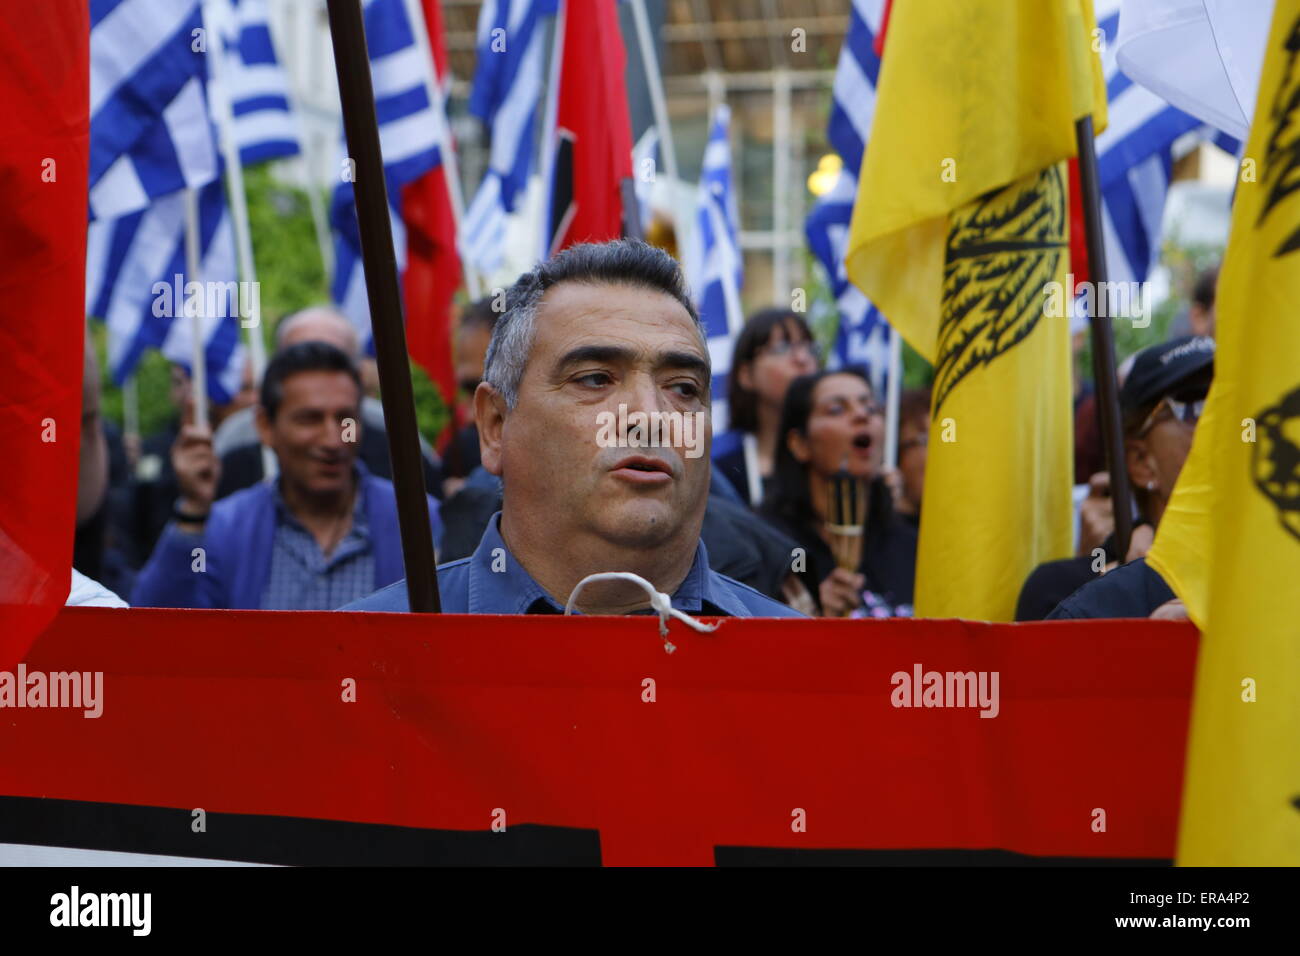 Athens, Greece. 29th May, 2015. Golden Dawn sympathizers listen to the speeches and shout slogans. Right-wing party Golden Dawn held a rally in Athens, remembering the fall of Constantinople and the death of the last Byzantine Emperor Constantine XI Palaiologos in 1453. His legend state that he will re-conquer Constantinople for Christianity. © Michael Debets/Pacific Press/Alamy Live News Stock Photo